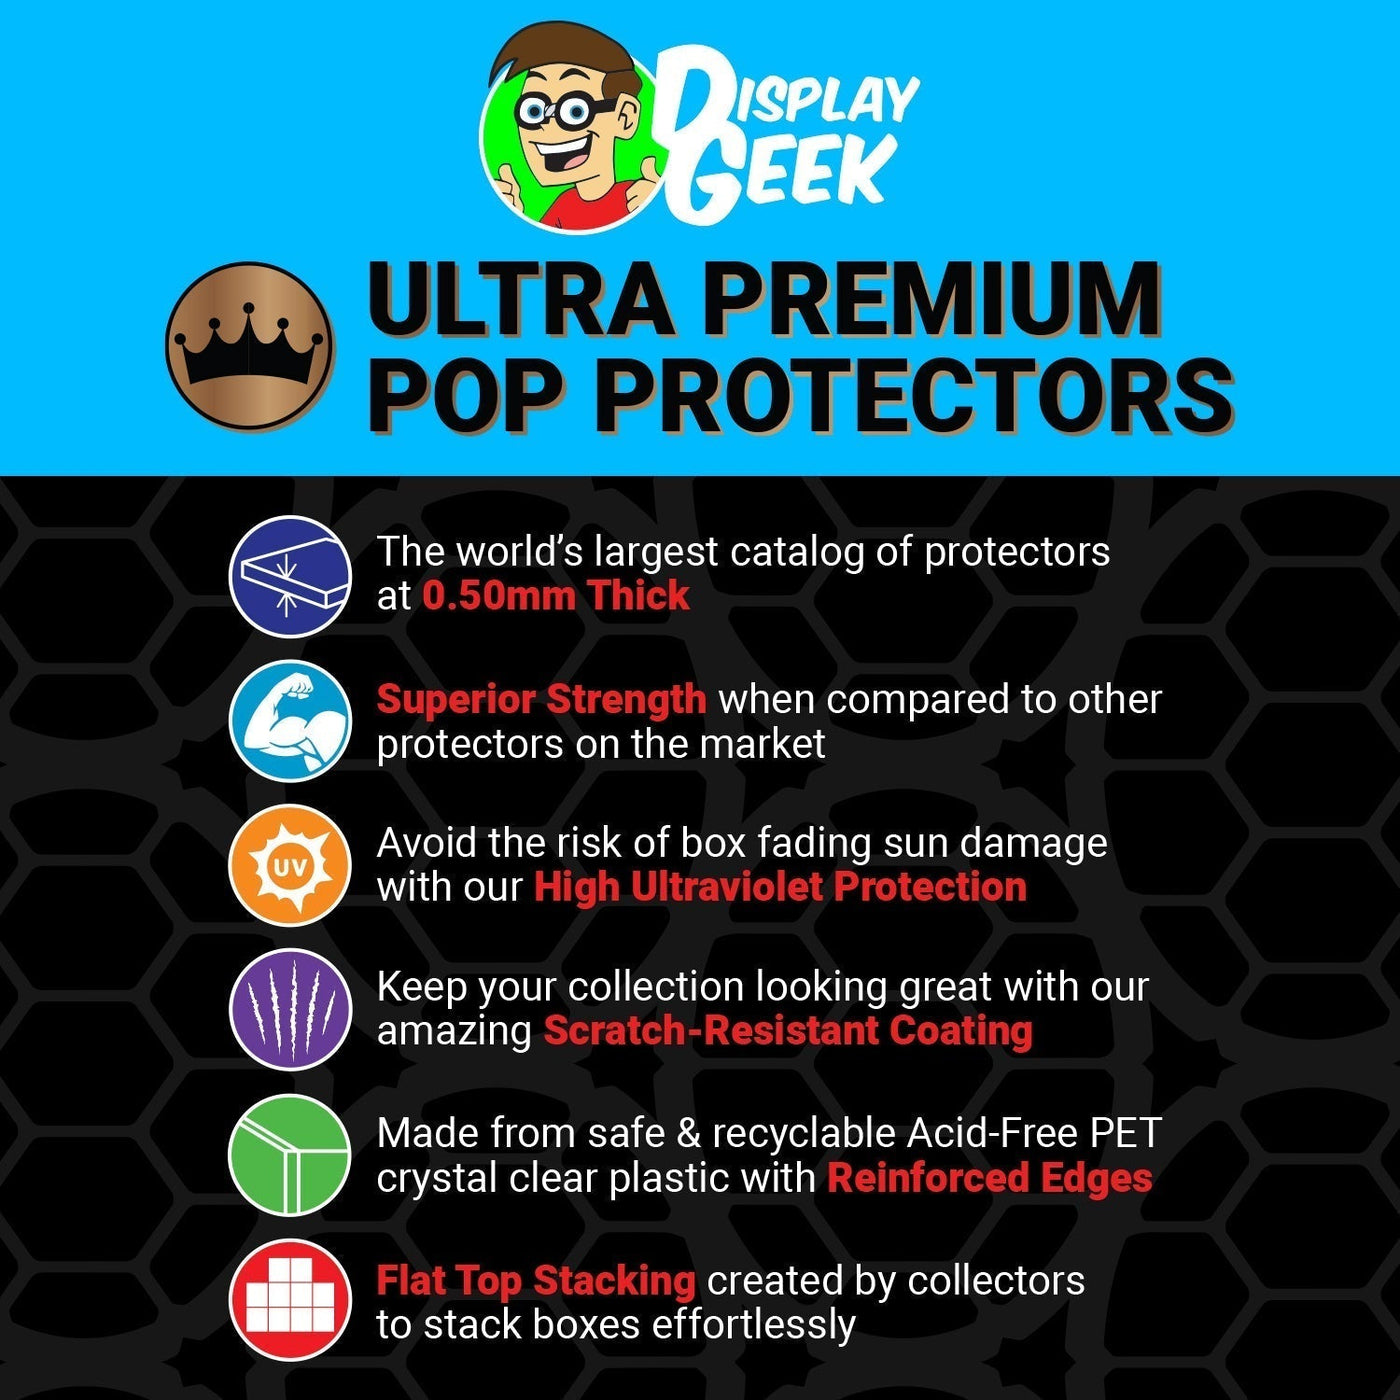 Pop Protector for Victory Shawarma Black Widow #759 Funko Pop Deluxe on The Protector Guide App by Display Geek